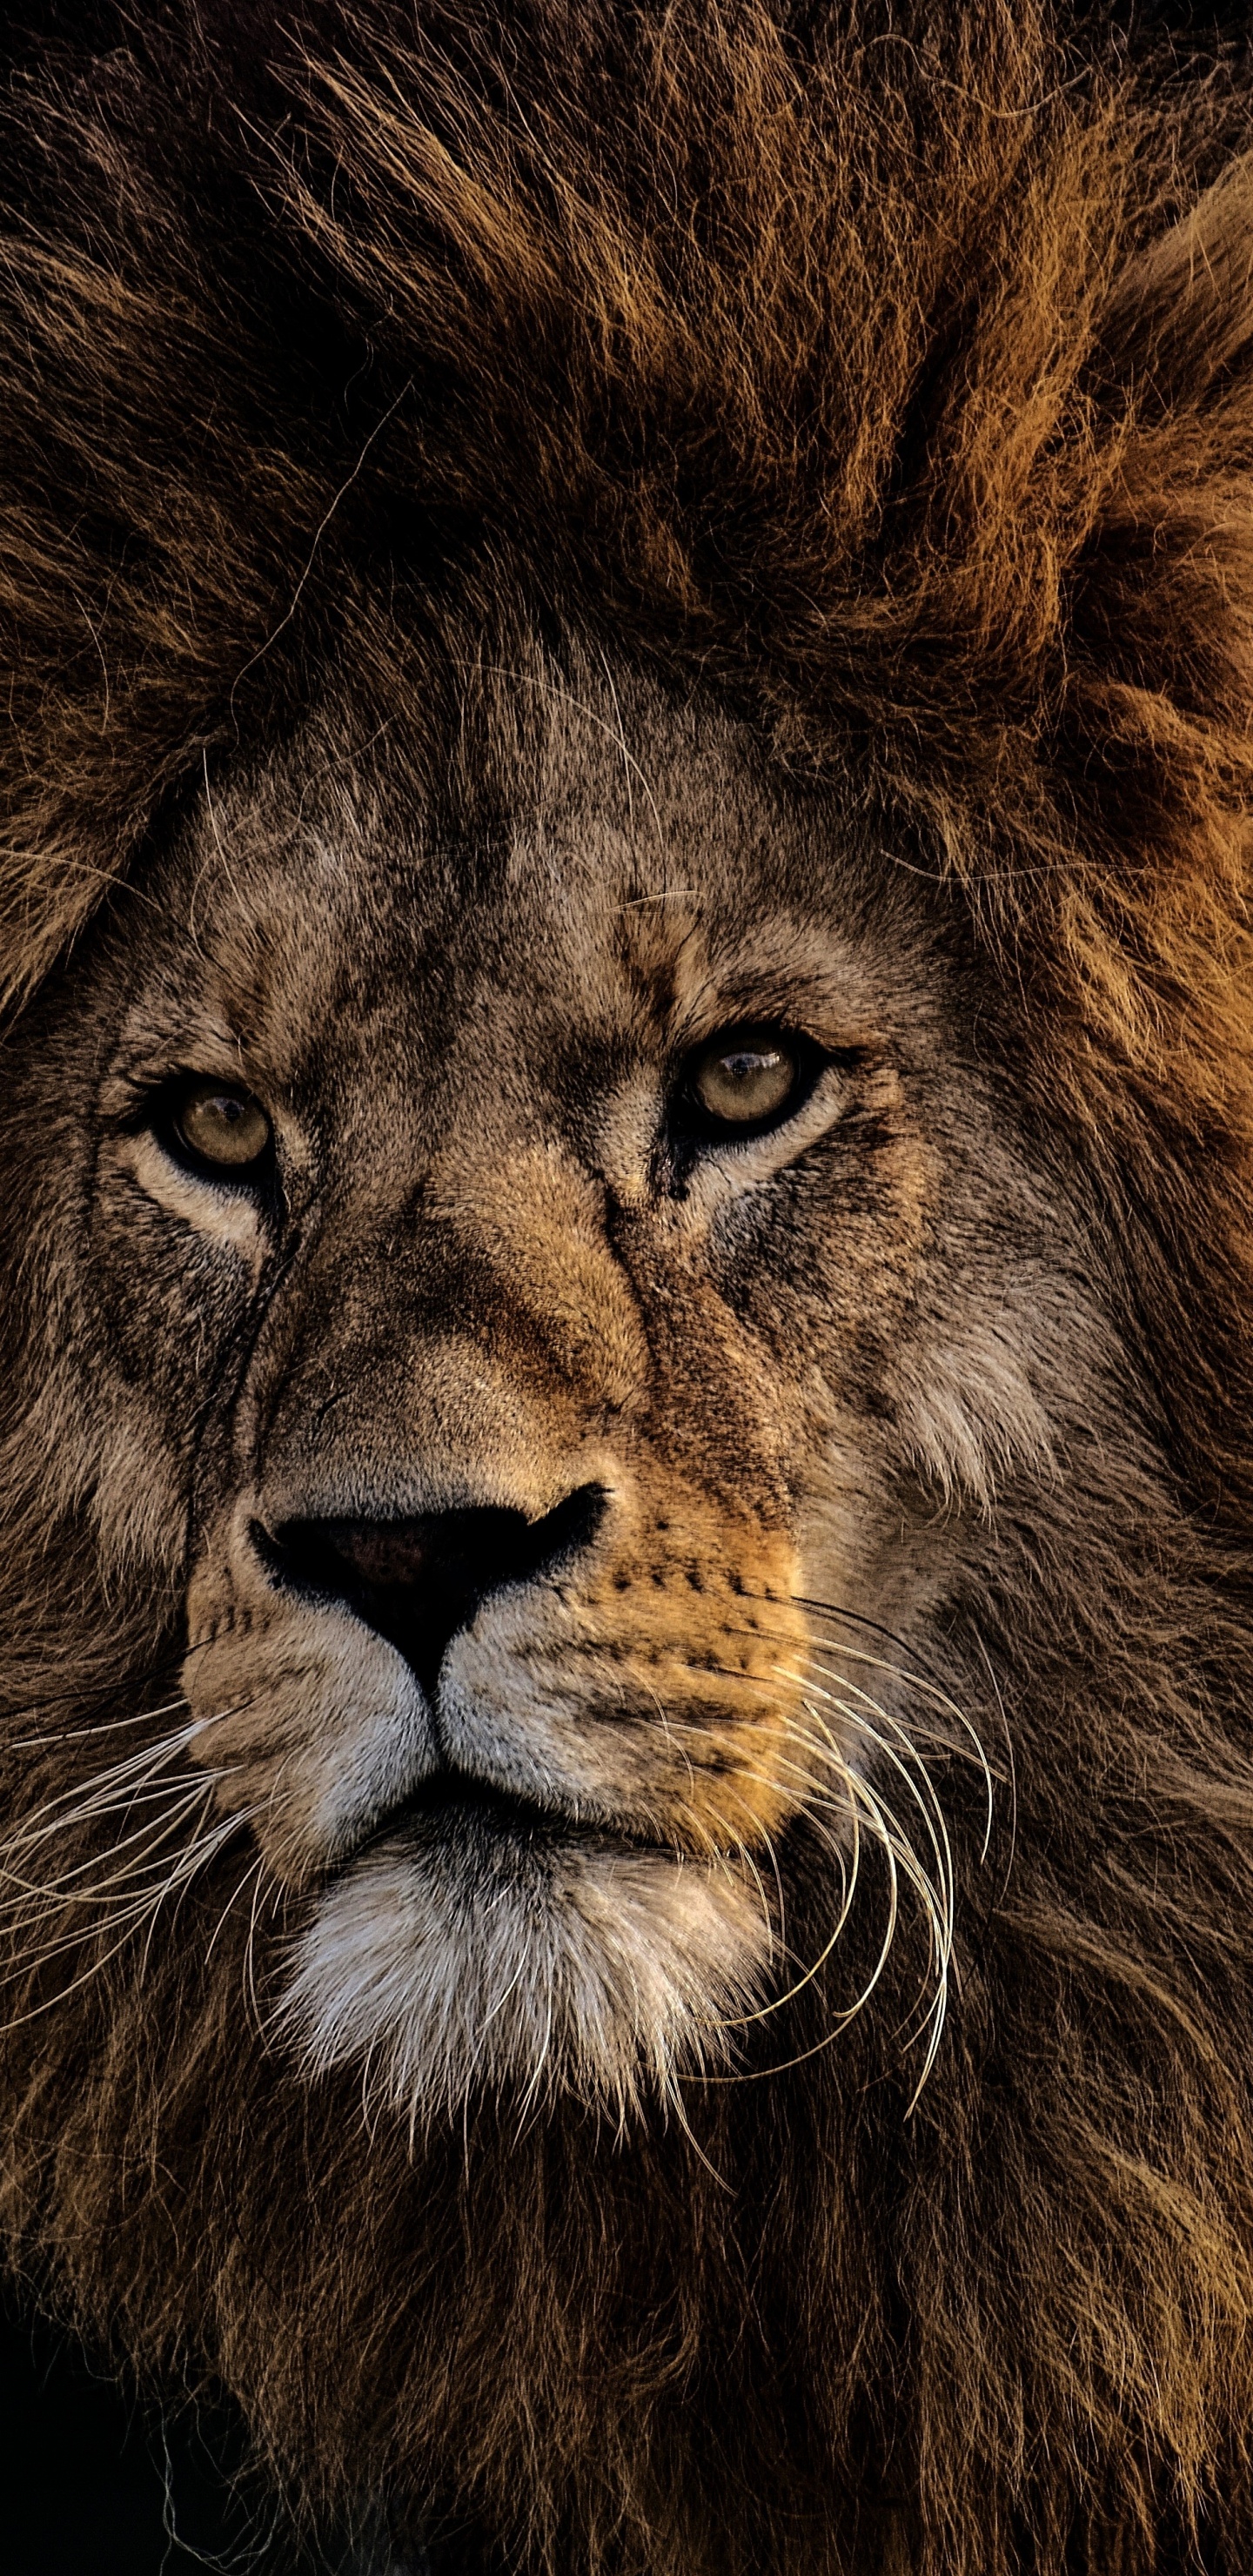 Lion With Black Background in Close up Photography. Wallpaper in 1440x2960 Resolution